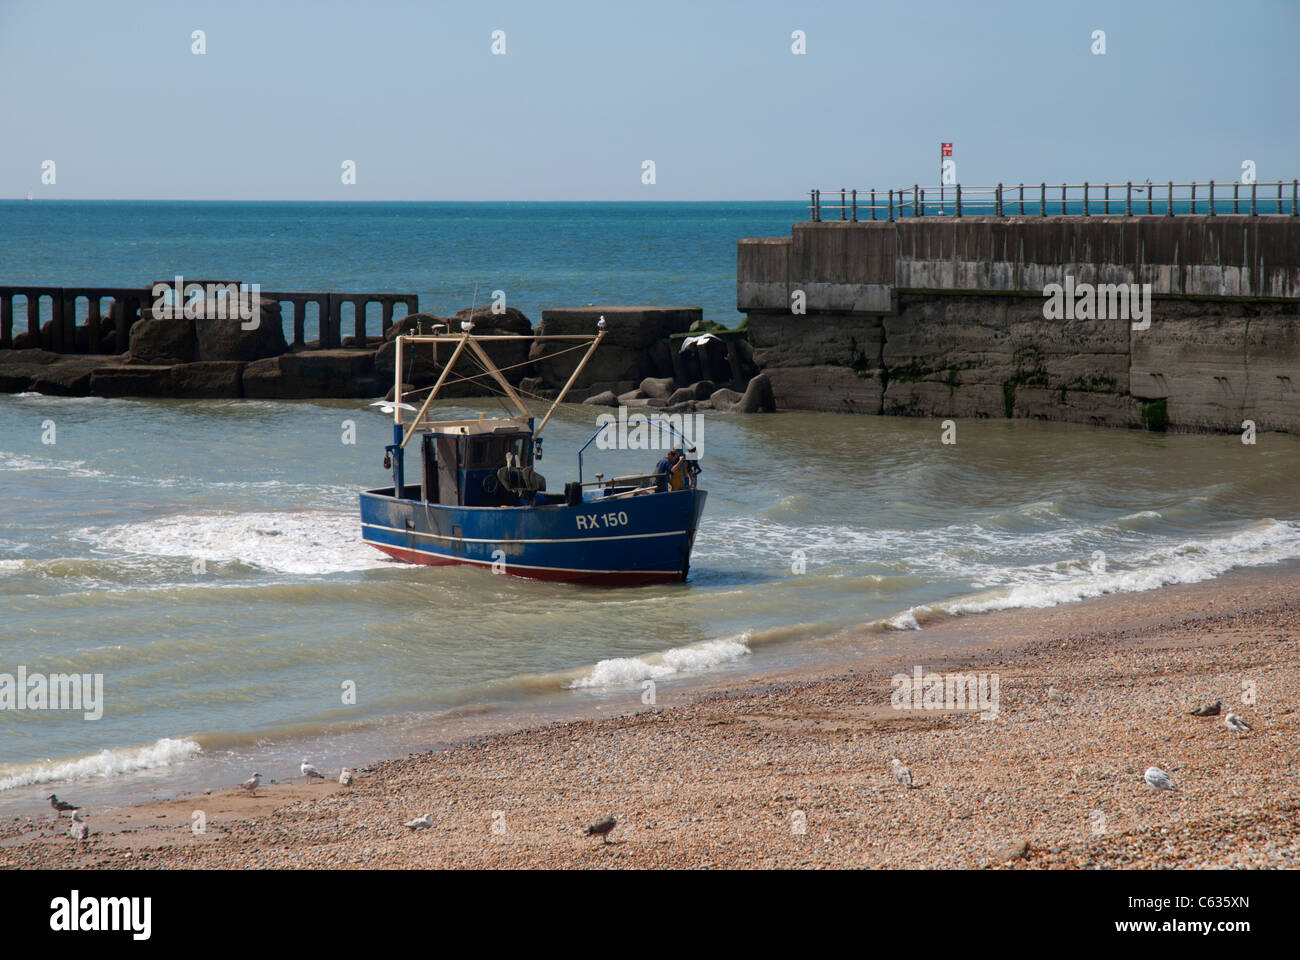 Hastings has the largest beach-based fishing fleet in England. A returning fishing boat waiting to be winched up onto the beach. Stock Photo